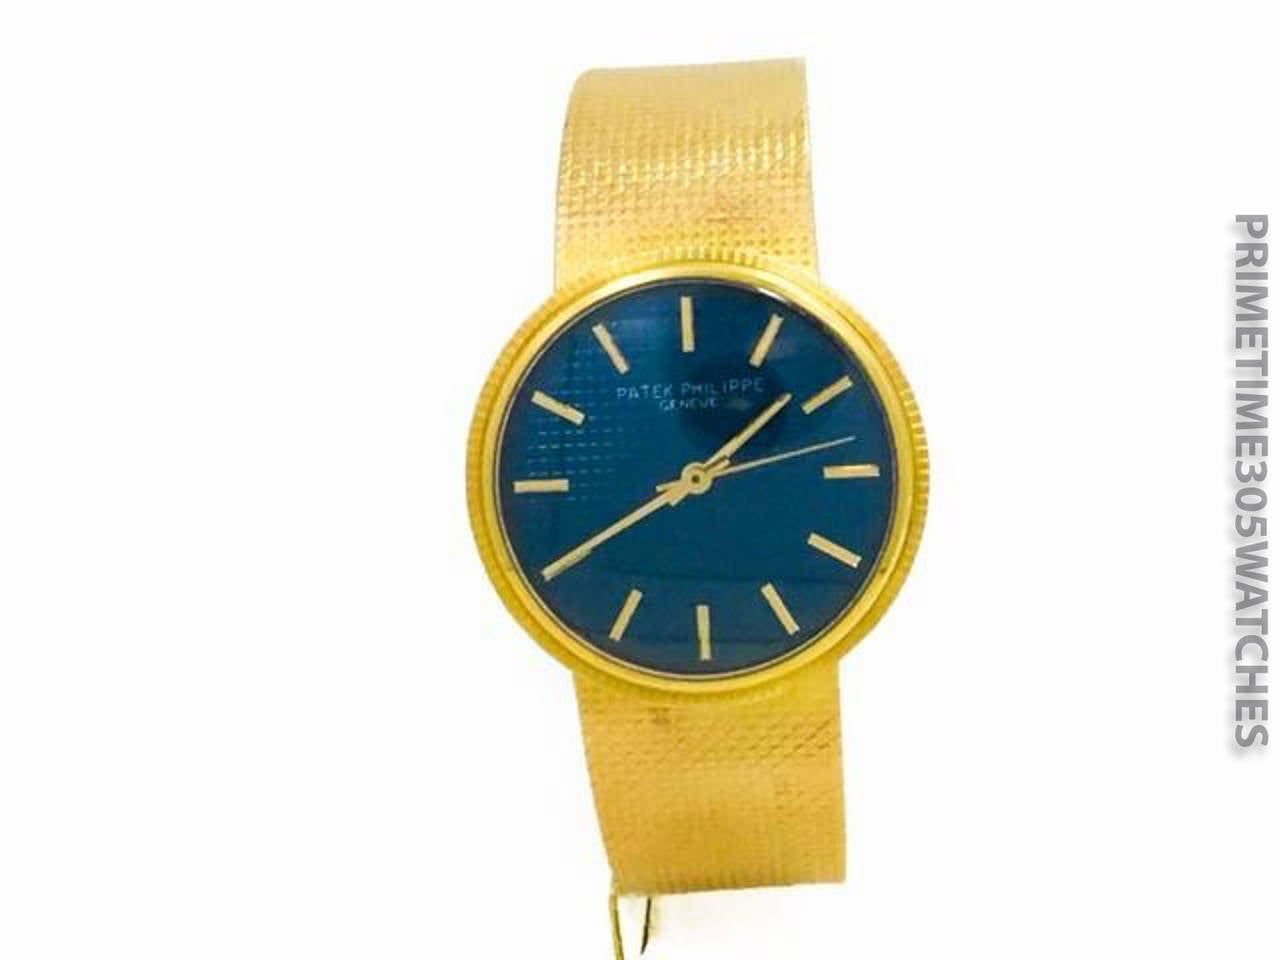 Mens (35mm) Patek Philippe 18k Yellow Gold Automatic Movement Watch On Bracelet w/ Backwind Crown, Ref 3563/3. The Watch is Functioning Great and is in Great Condition, though there are Some Small Marks on the Bracelet where watch bracelet connects